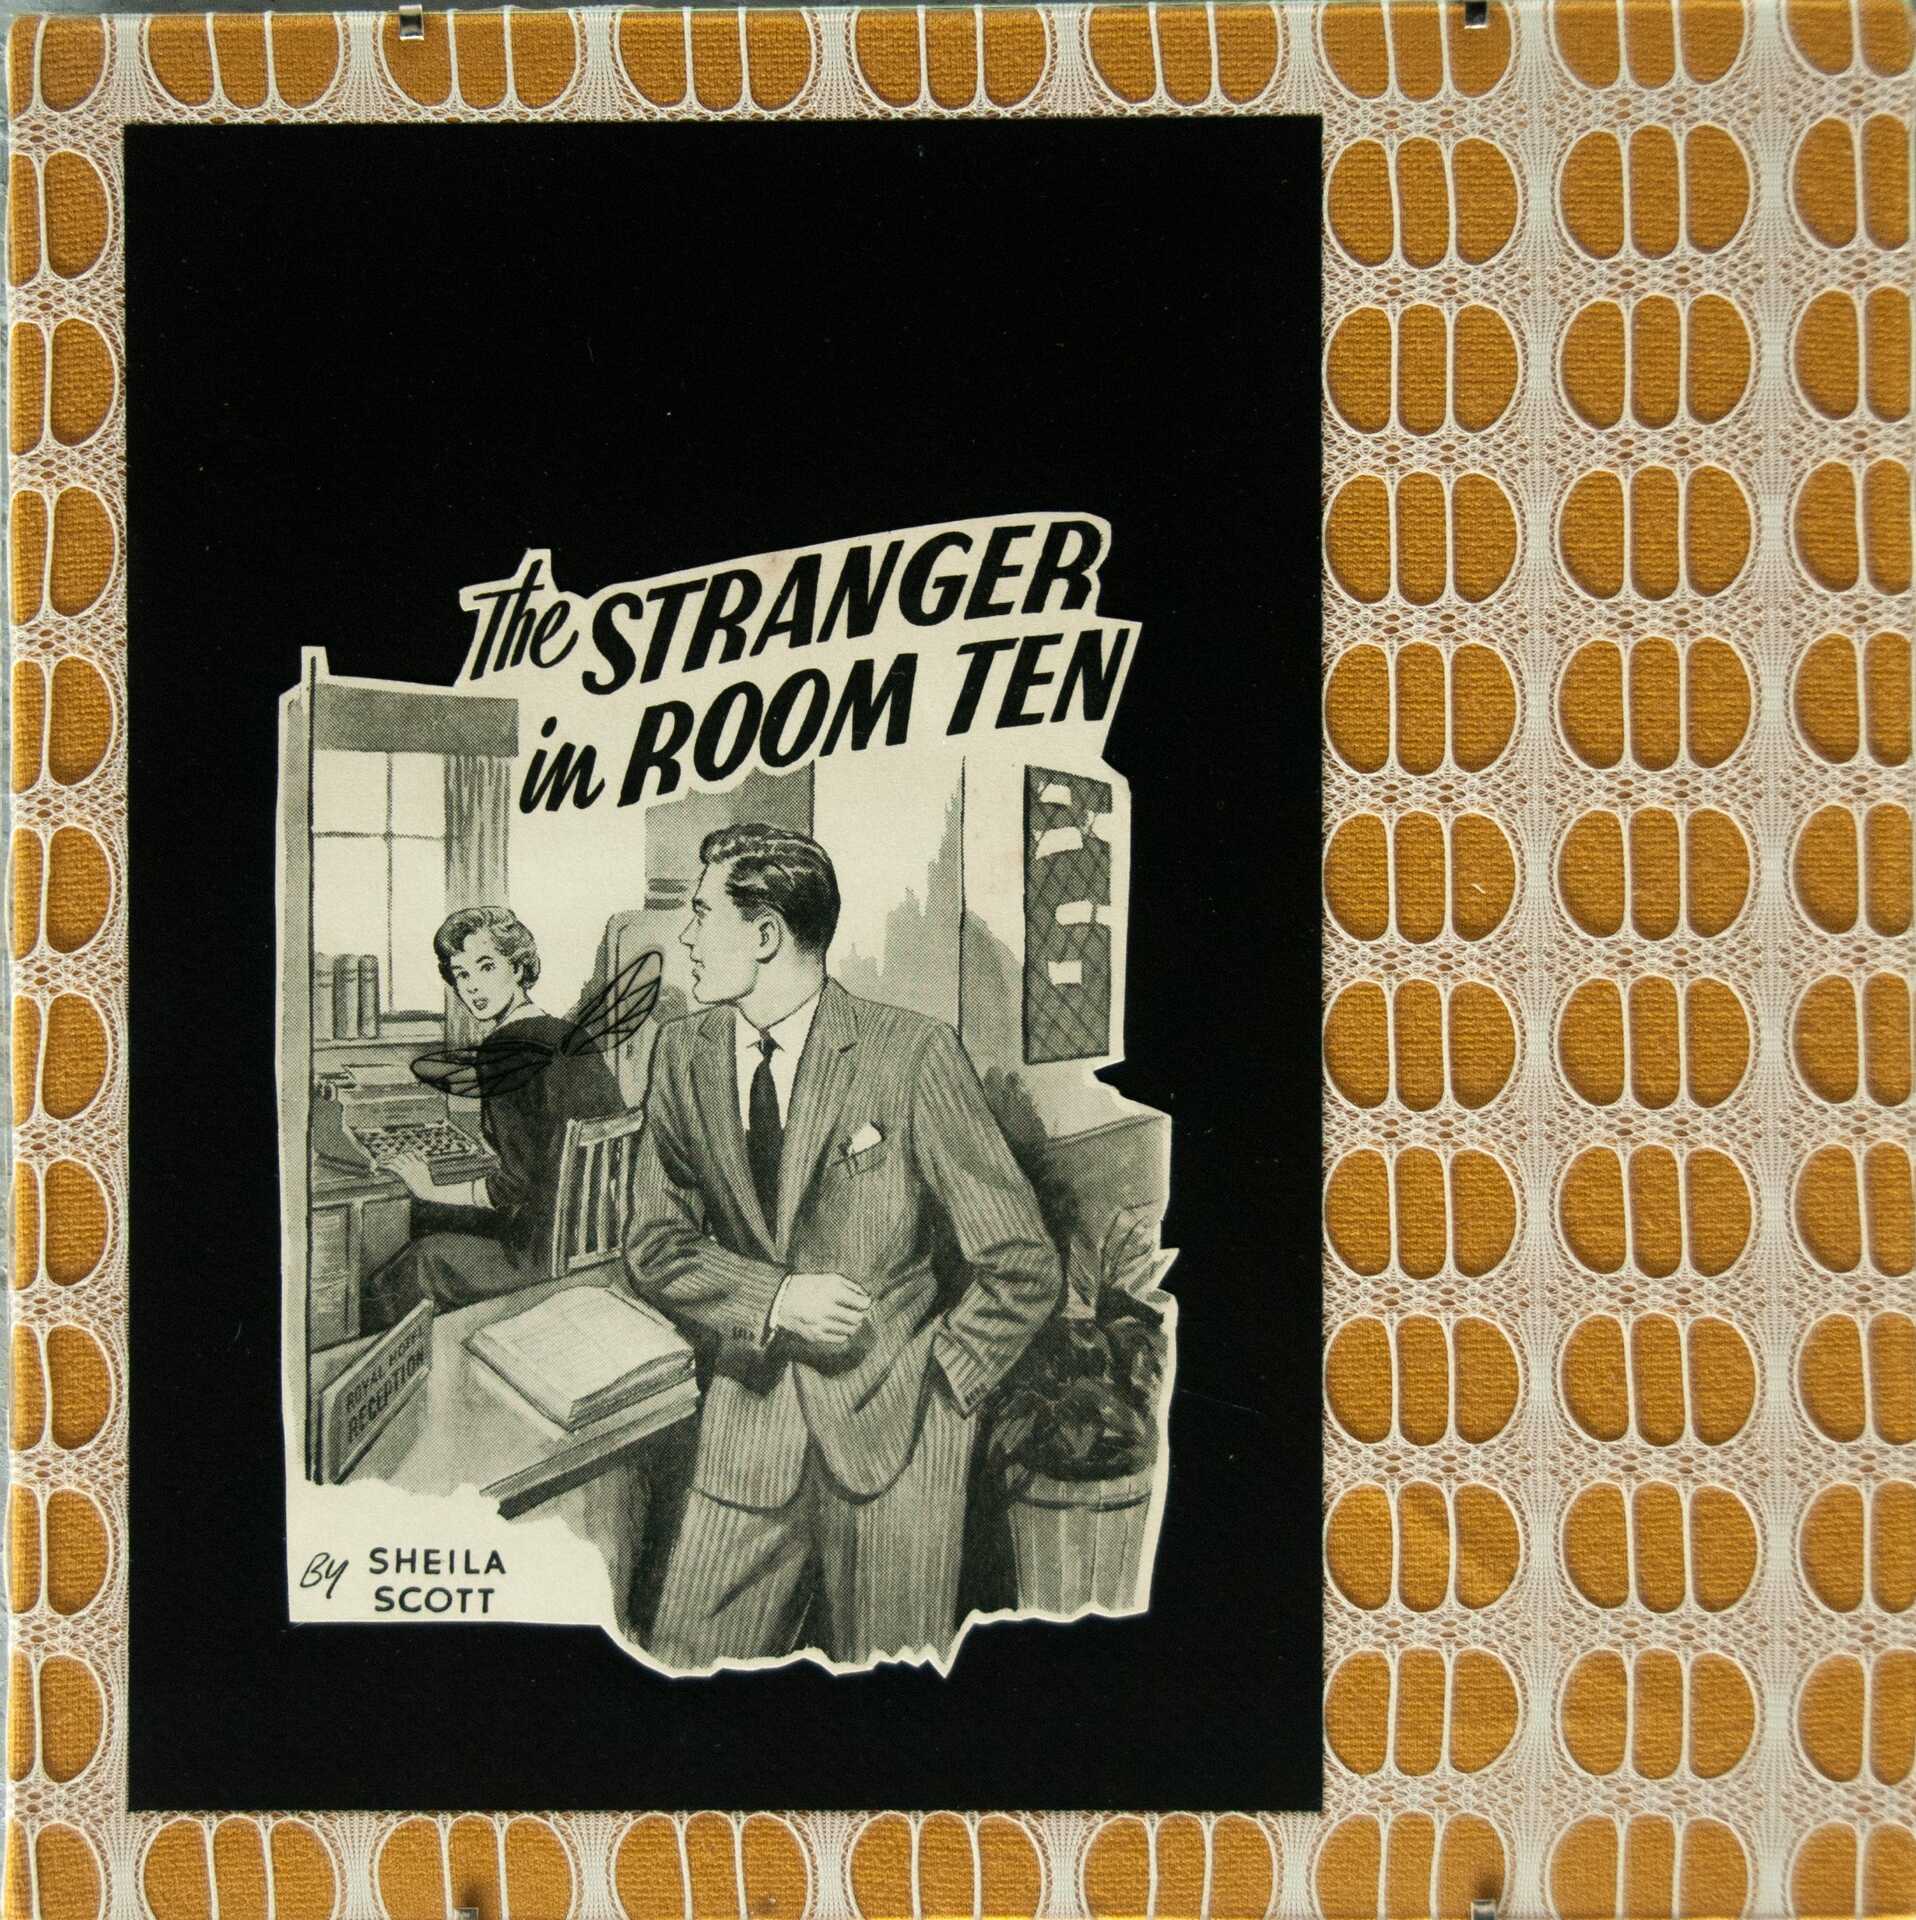 "The Stranger in Room Ten" by Libby Bloxham. A vintage book illustration is layered over black card and orange-and-white vintage fabric, to create a square collage. The illustration depicts a woman working on a typewriter behind a reception counter, while in the foreground a man in a suit leans over the counter with a casual air. The printed title reads 'The Stranger in Room Ten by Sheila Scott'. Acetate insect wings have been added to the woman's back.